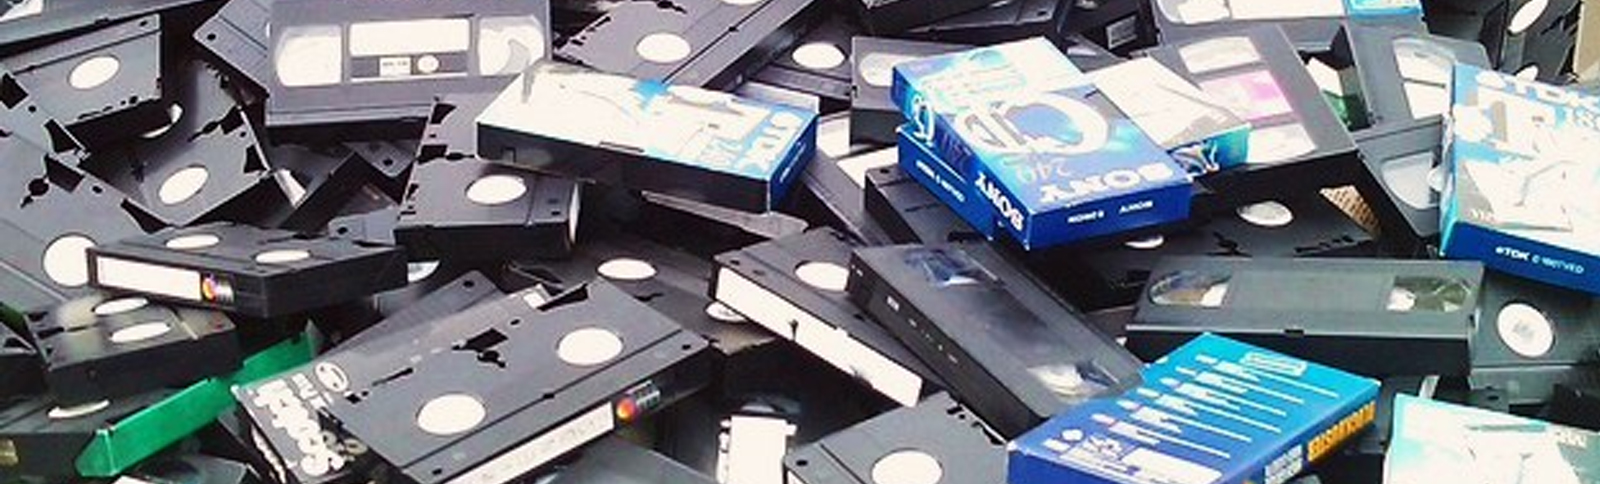 Video VHS tapes to DVD or Digital File  in Oxfordshire UK